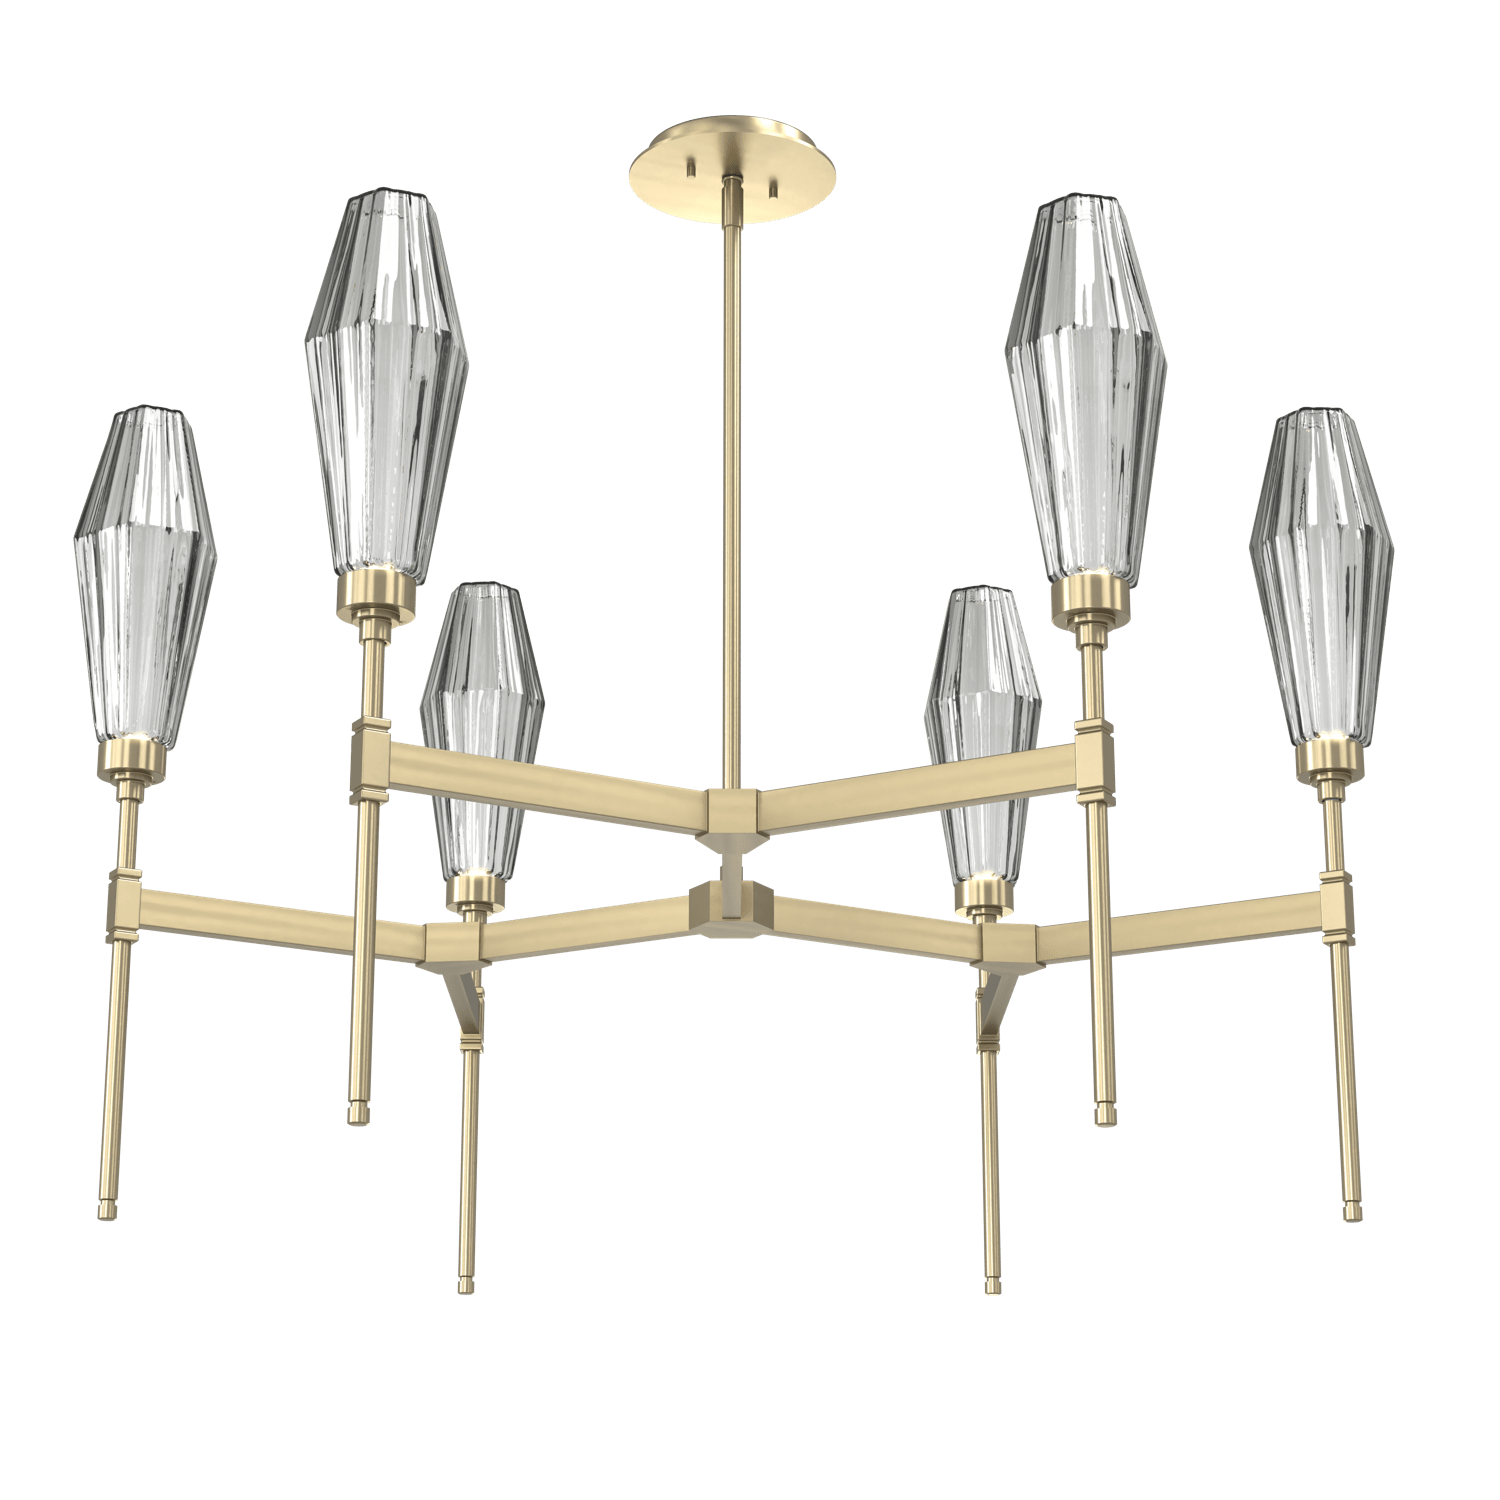 CHB0049-37-HB-RS-Hammerton-Studio-Aalto-37-inch-round-belvedere-chandelier-with-heritage-brass-finish-and-optic-ribbed-smoke-glass-shades-and-LED-lamping